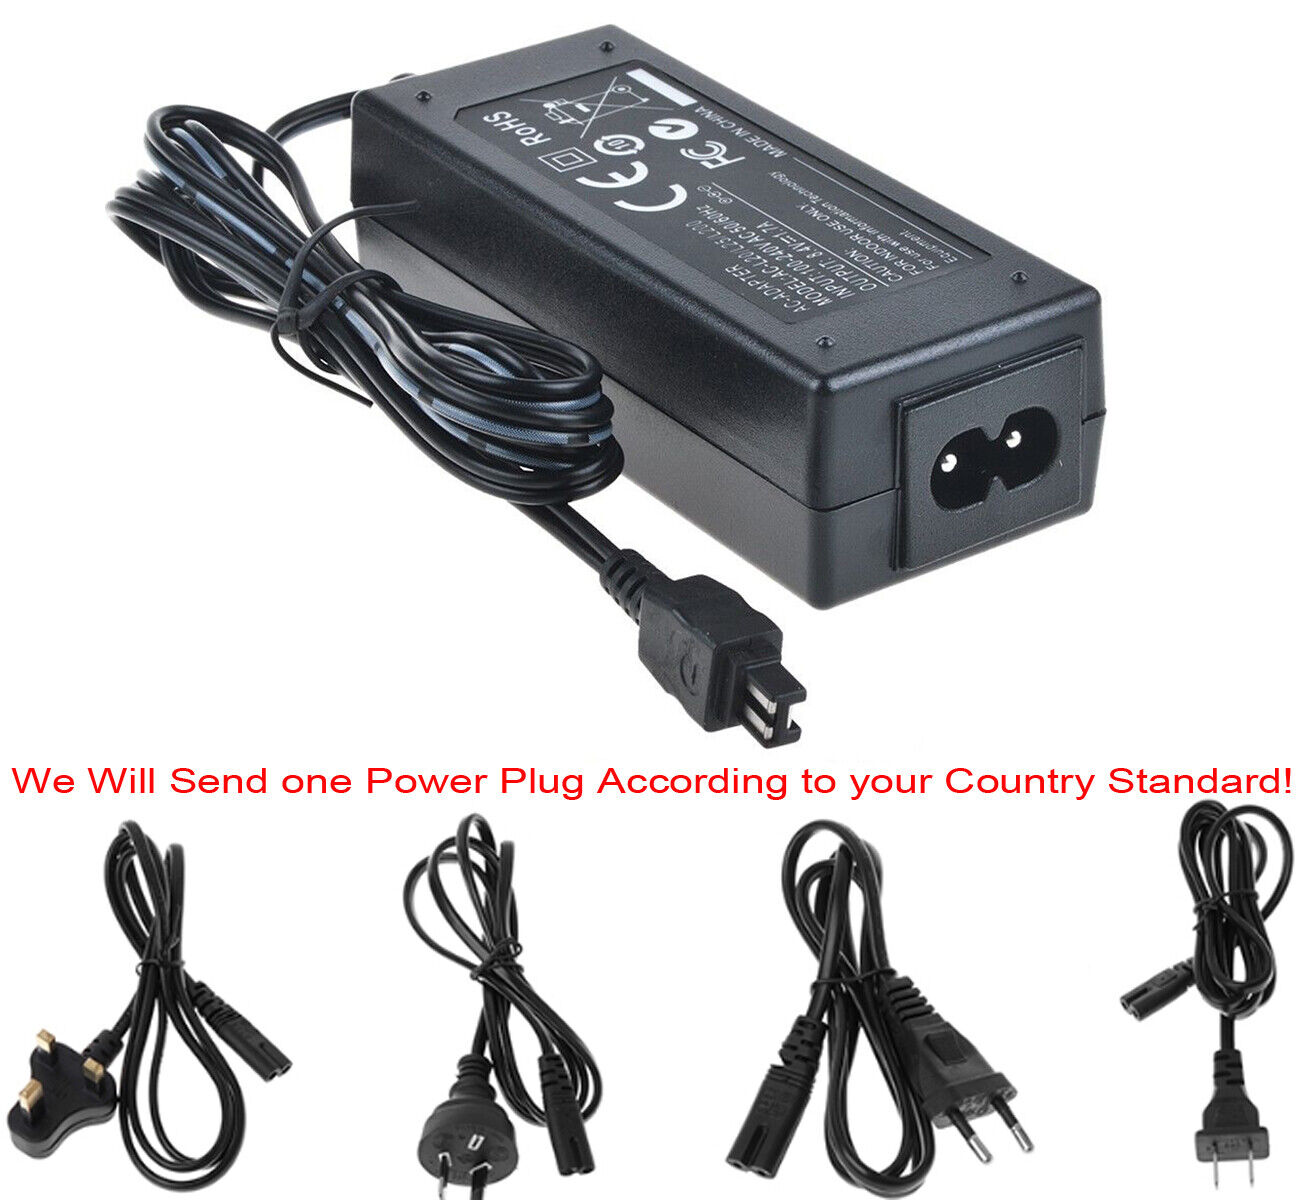 AC Adapter Power Supply for Sony HXR-MC50, PXW-X70, PXW-Z90, PXW-Z90V Camcorder Country/Region of Manufacture China Com - Click Image to Close